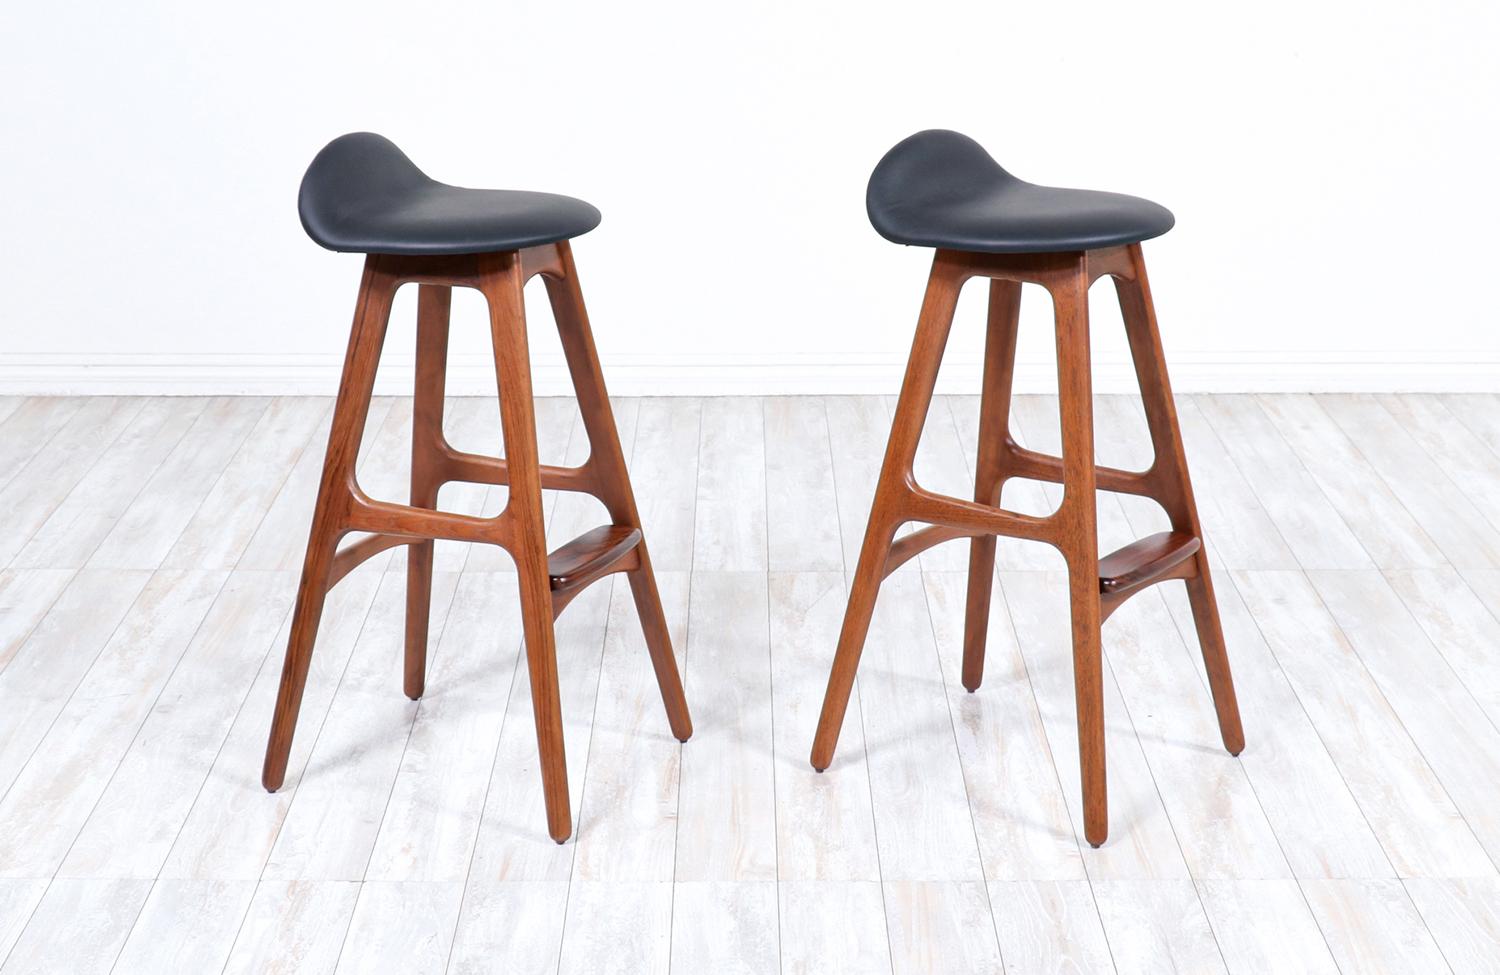 Pair of modern bar stools model 61 designed by Erik Buch for Oddense Maskinsnedkeri and manufactured in Denmark circa 1950s. These exceptionally crafted stools feature a minimalist streamline with a solid teak wood frame and a gorgeously contrasting